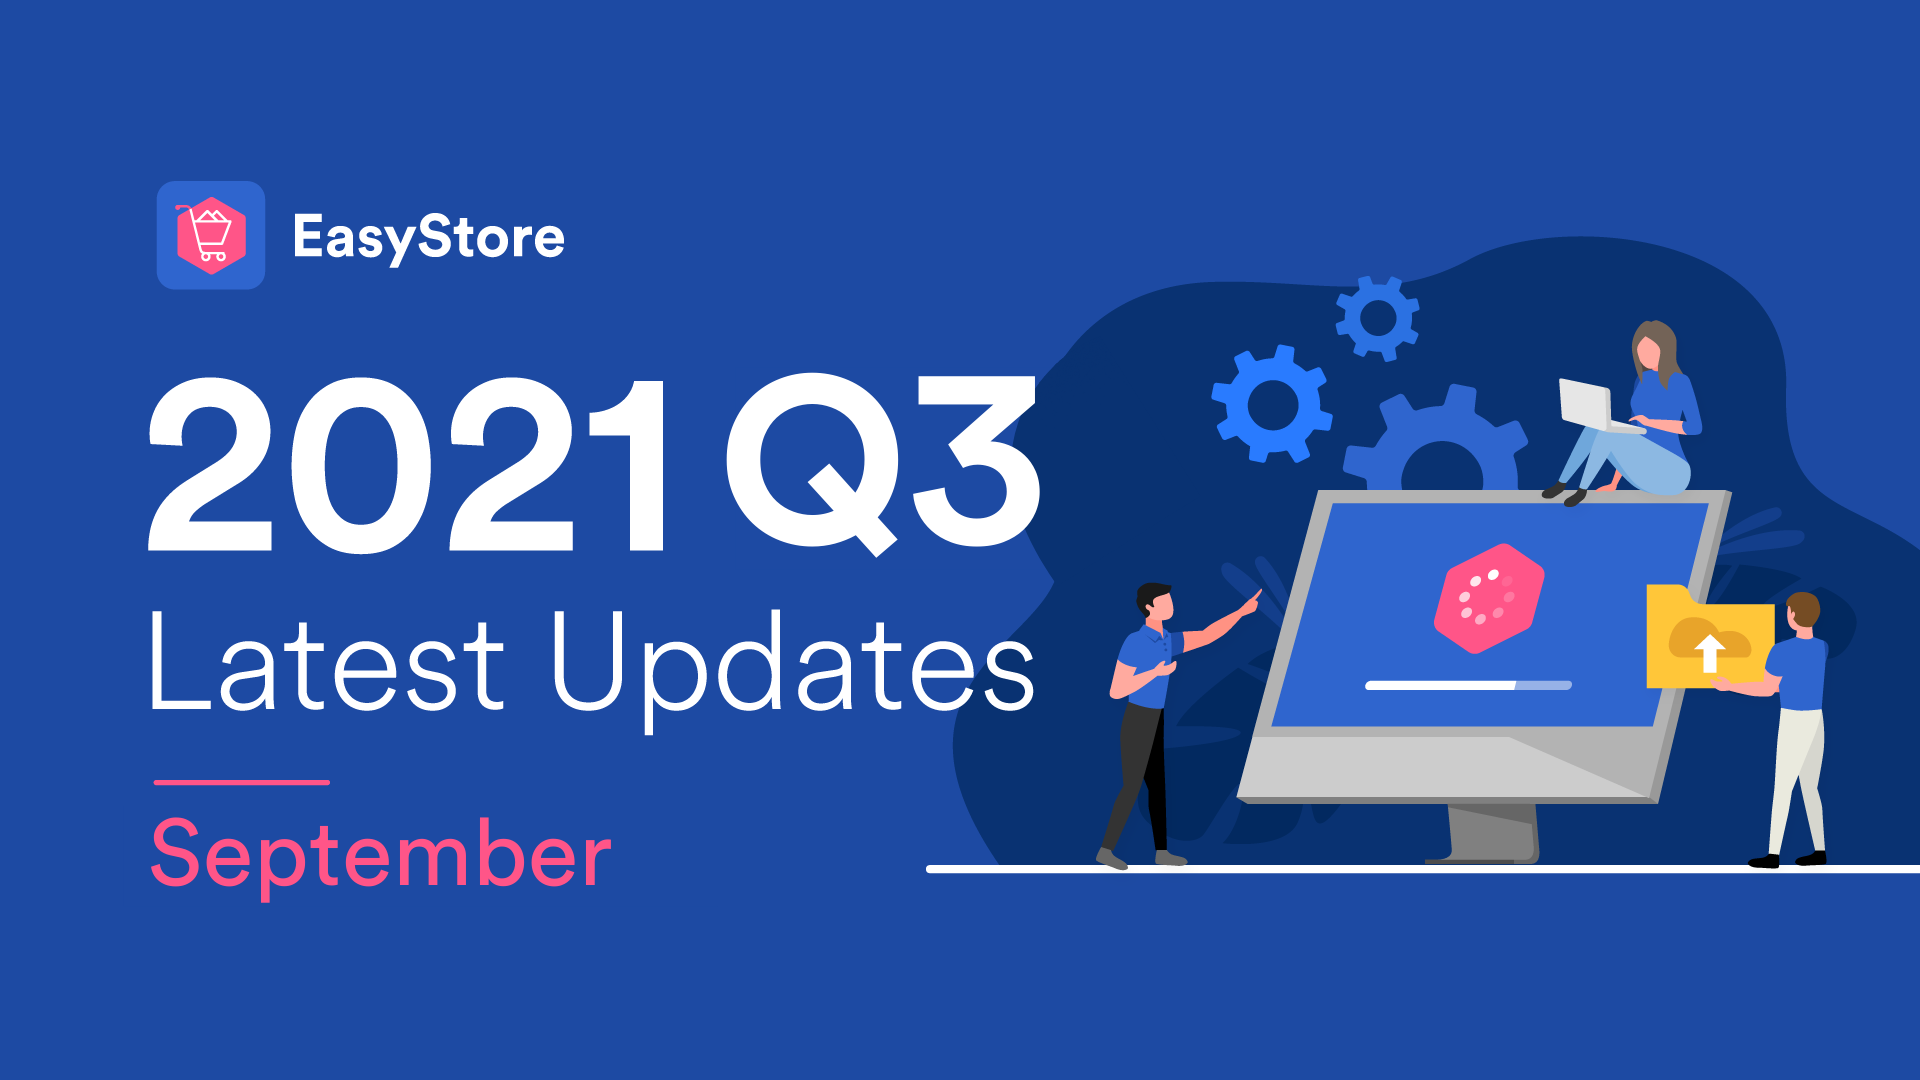 EasyStore Q3 Latest Updates: July - September 2021 | EasyStore